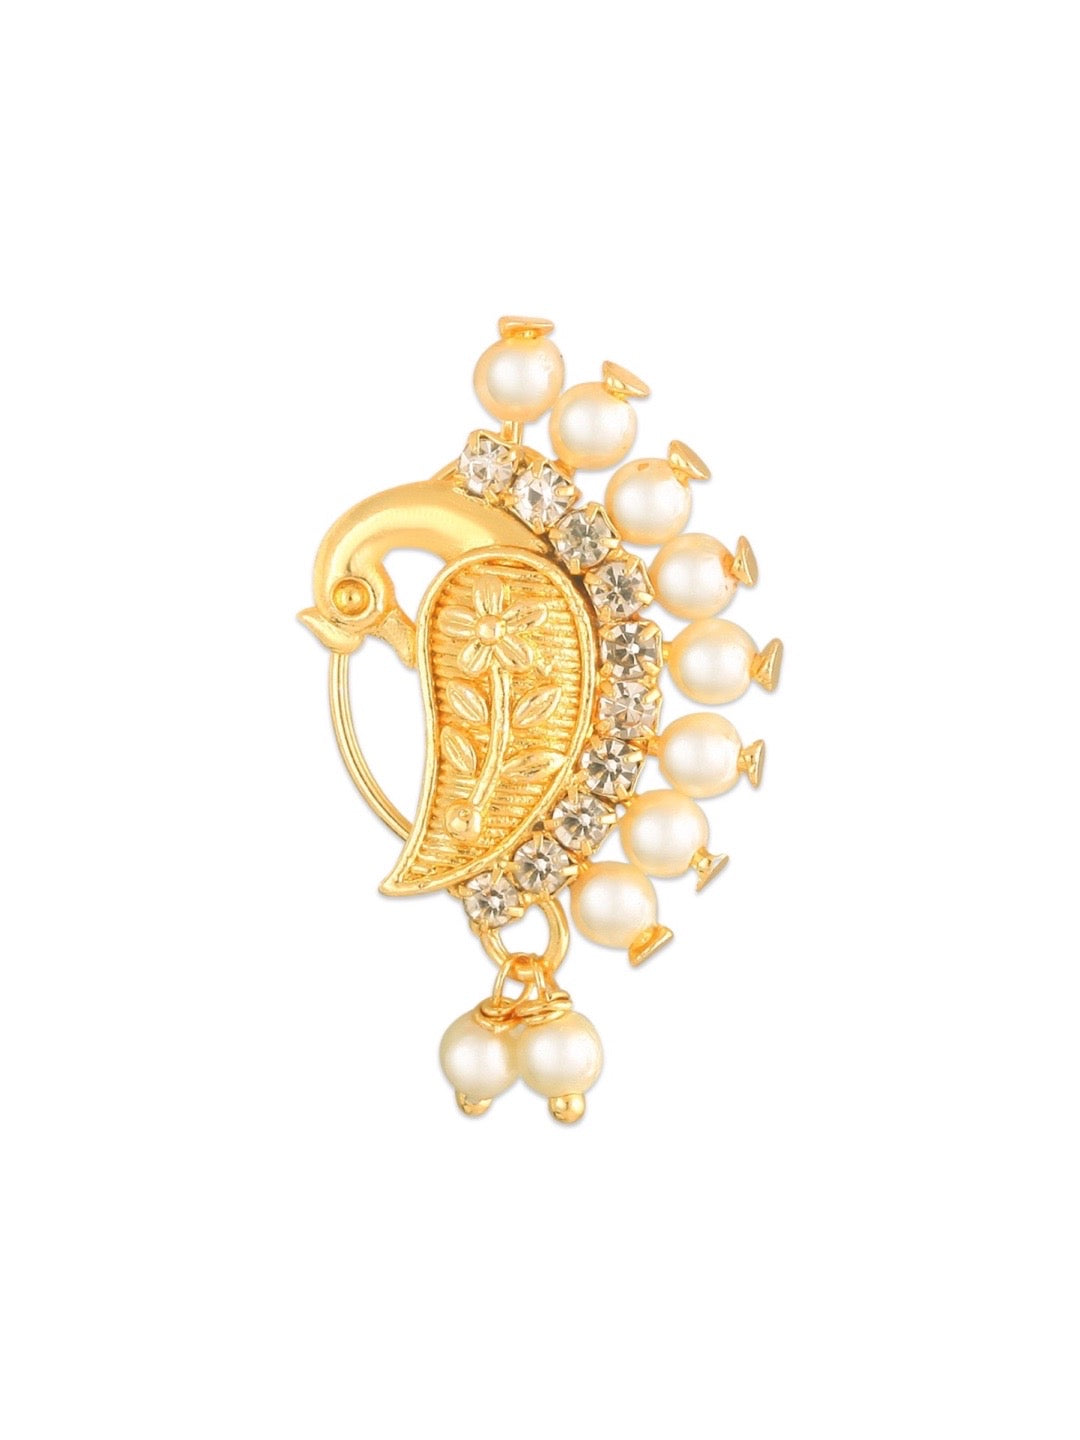 Gold Plated Maharashtrian Nath Peacock Design Nose Pin with Pearls